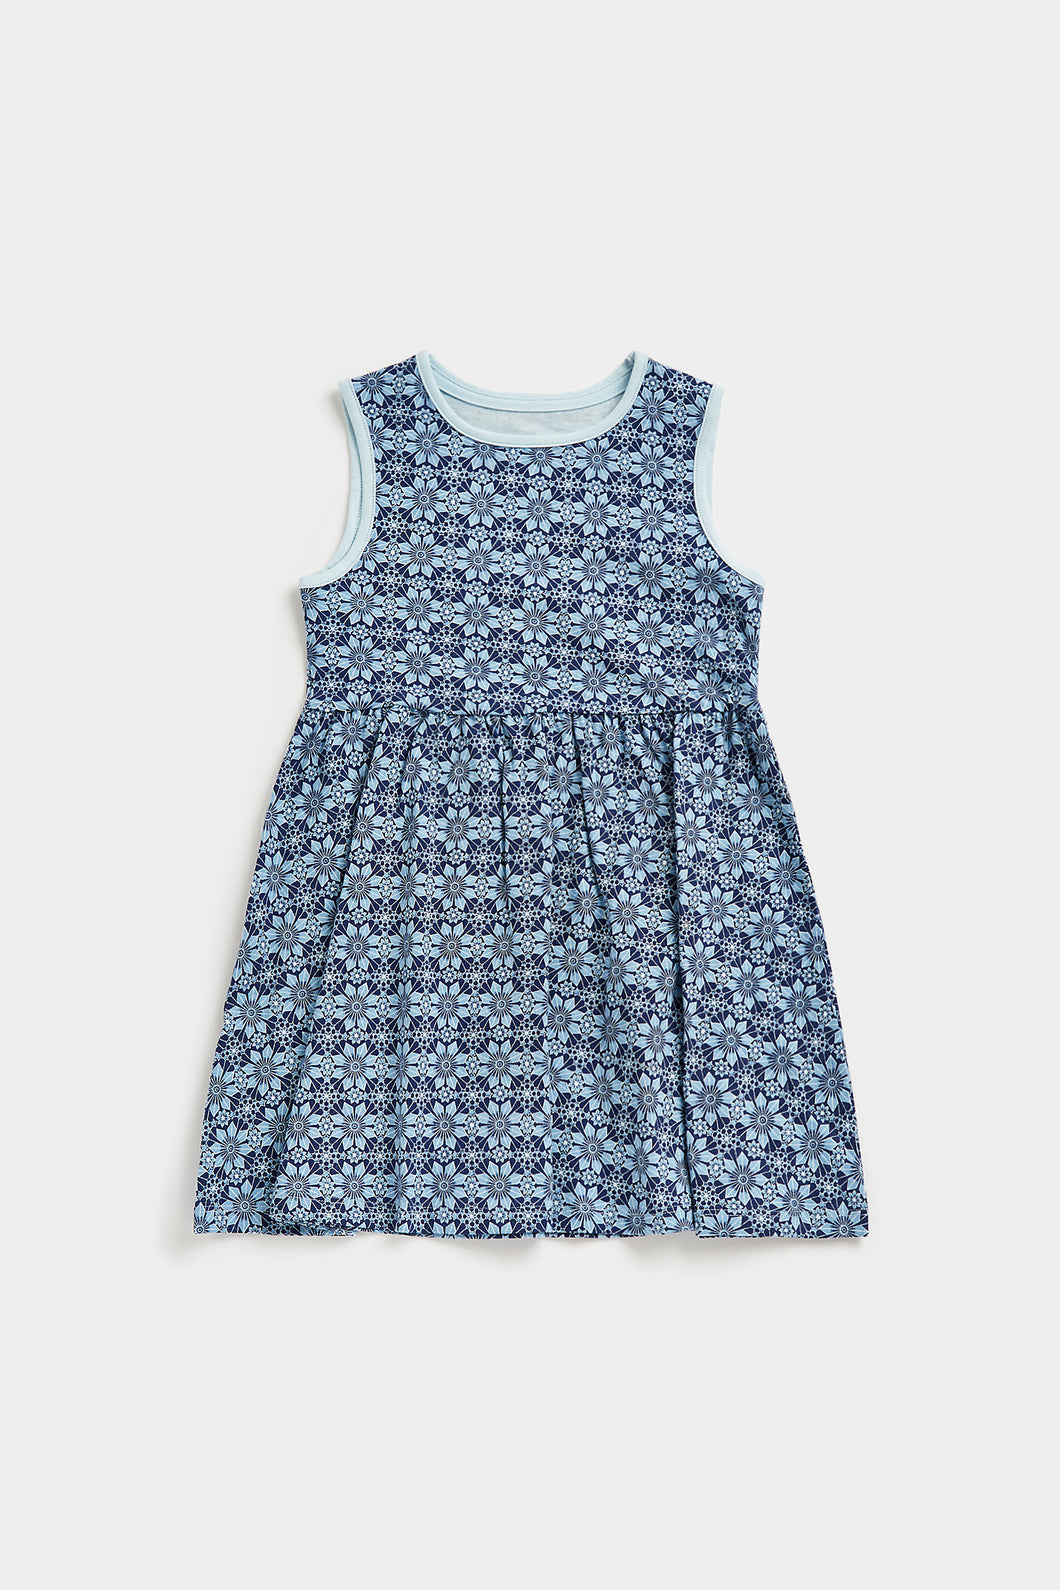 Mothercare Blue Floral Jersey Dress